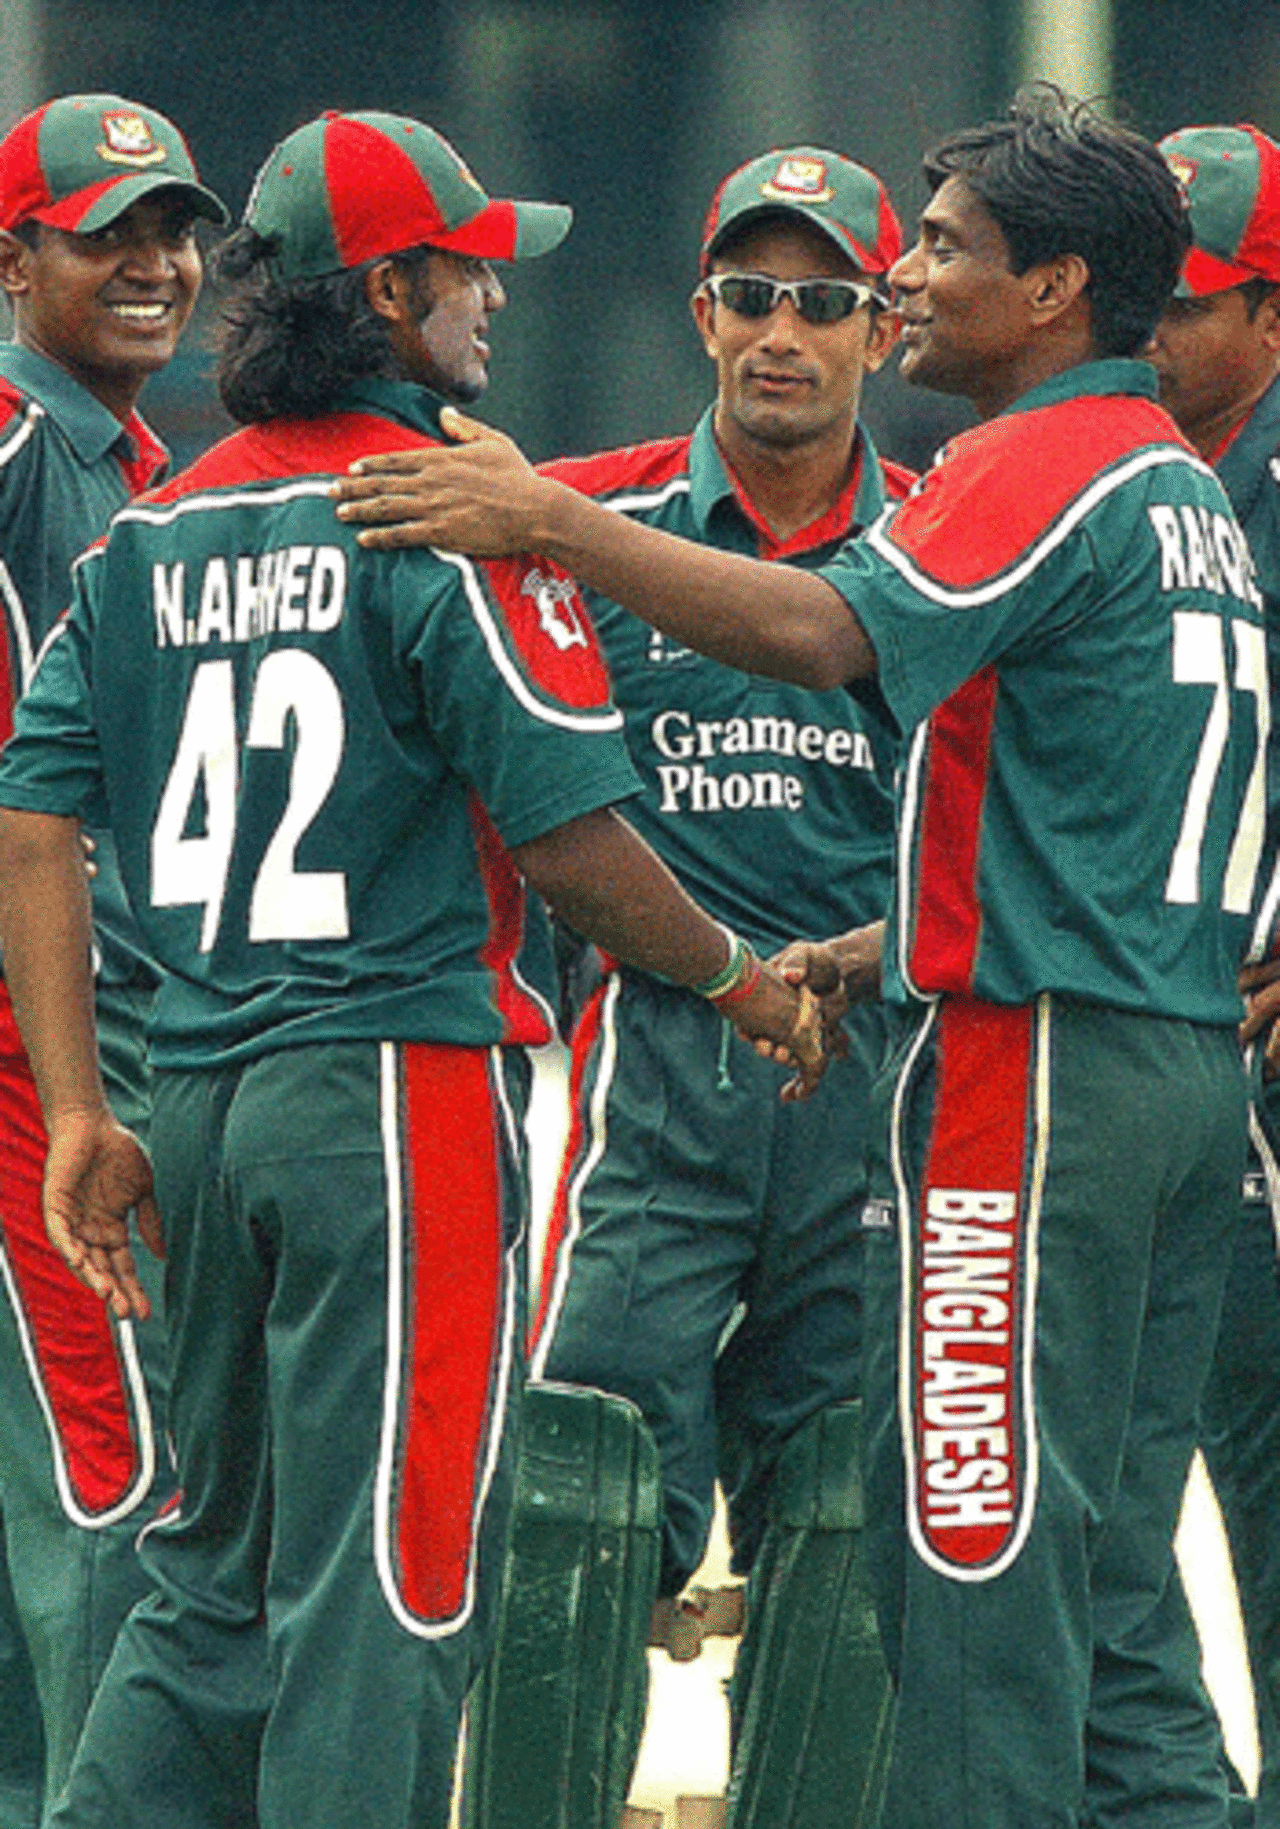 Shahriar Nafees Ahmed celebrates with his team-mates after taking the catch to dismiss Chaminda Vaas, Sri Lanka v Bangladesh, Sinhalese Sports Club ground, Colombo,  August  31, 2005